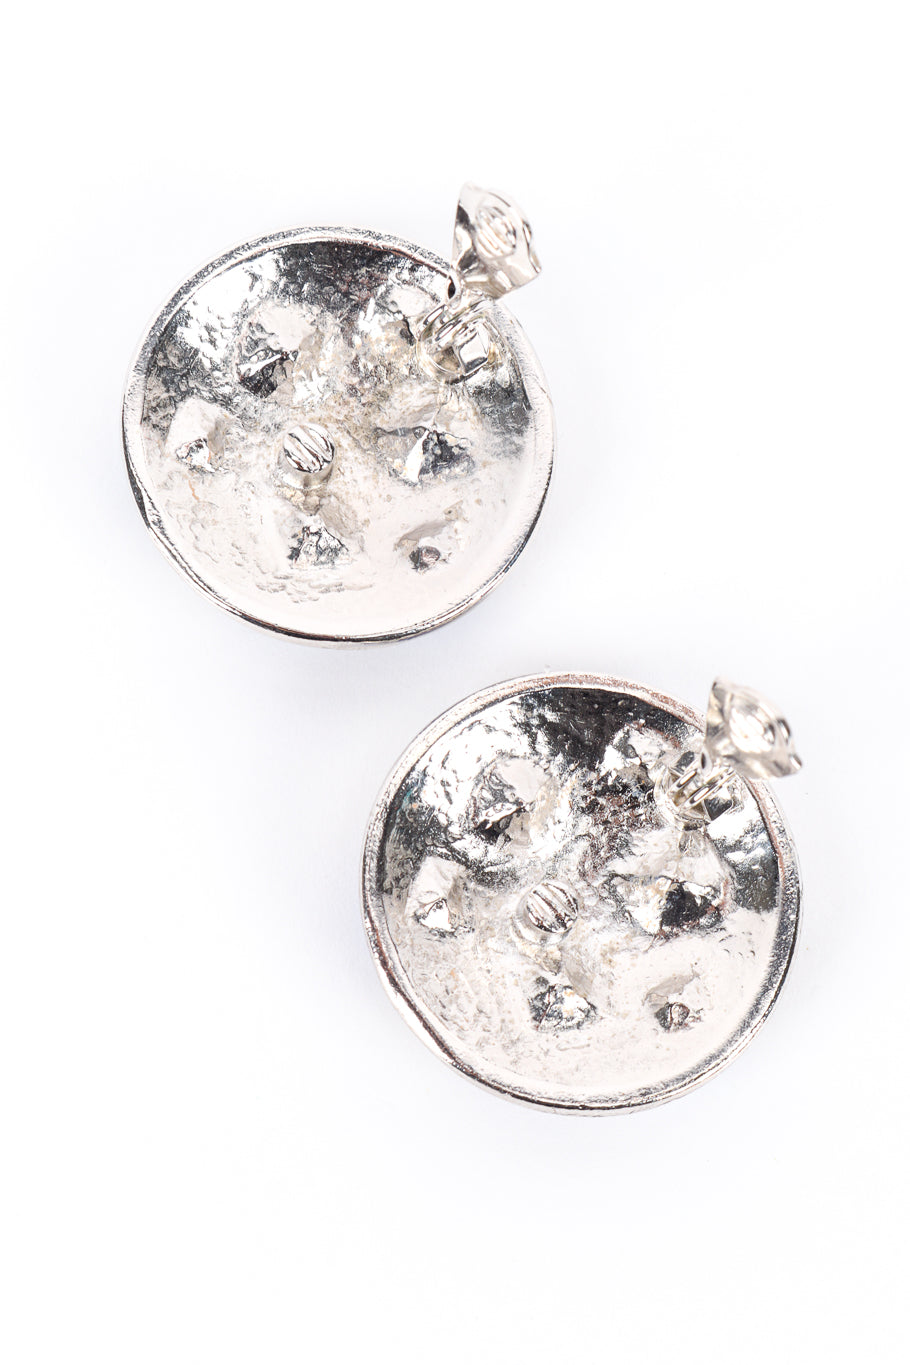 Vintage YSL Crystal Gem Button Earrings top view of clips @recess la